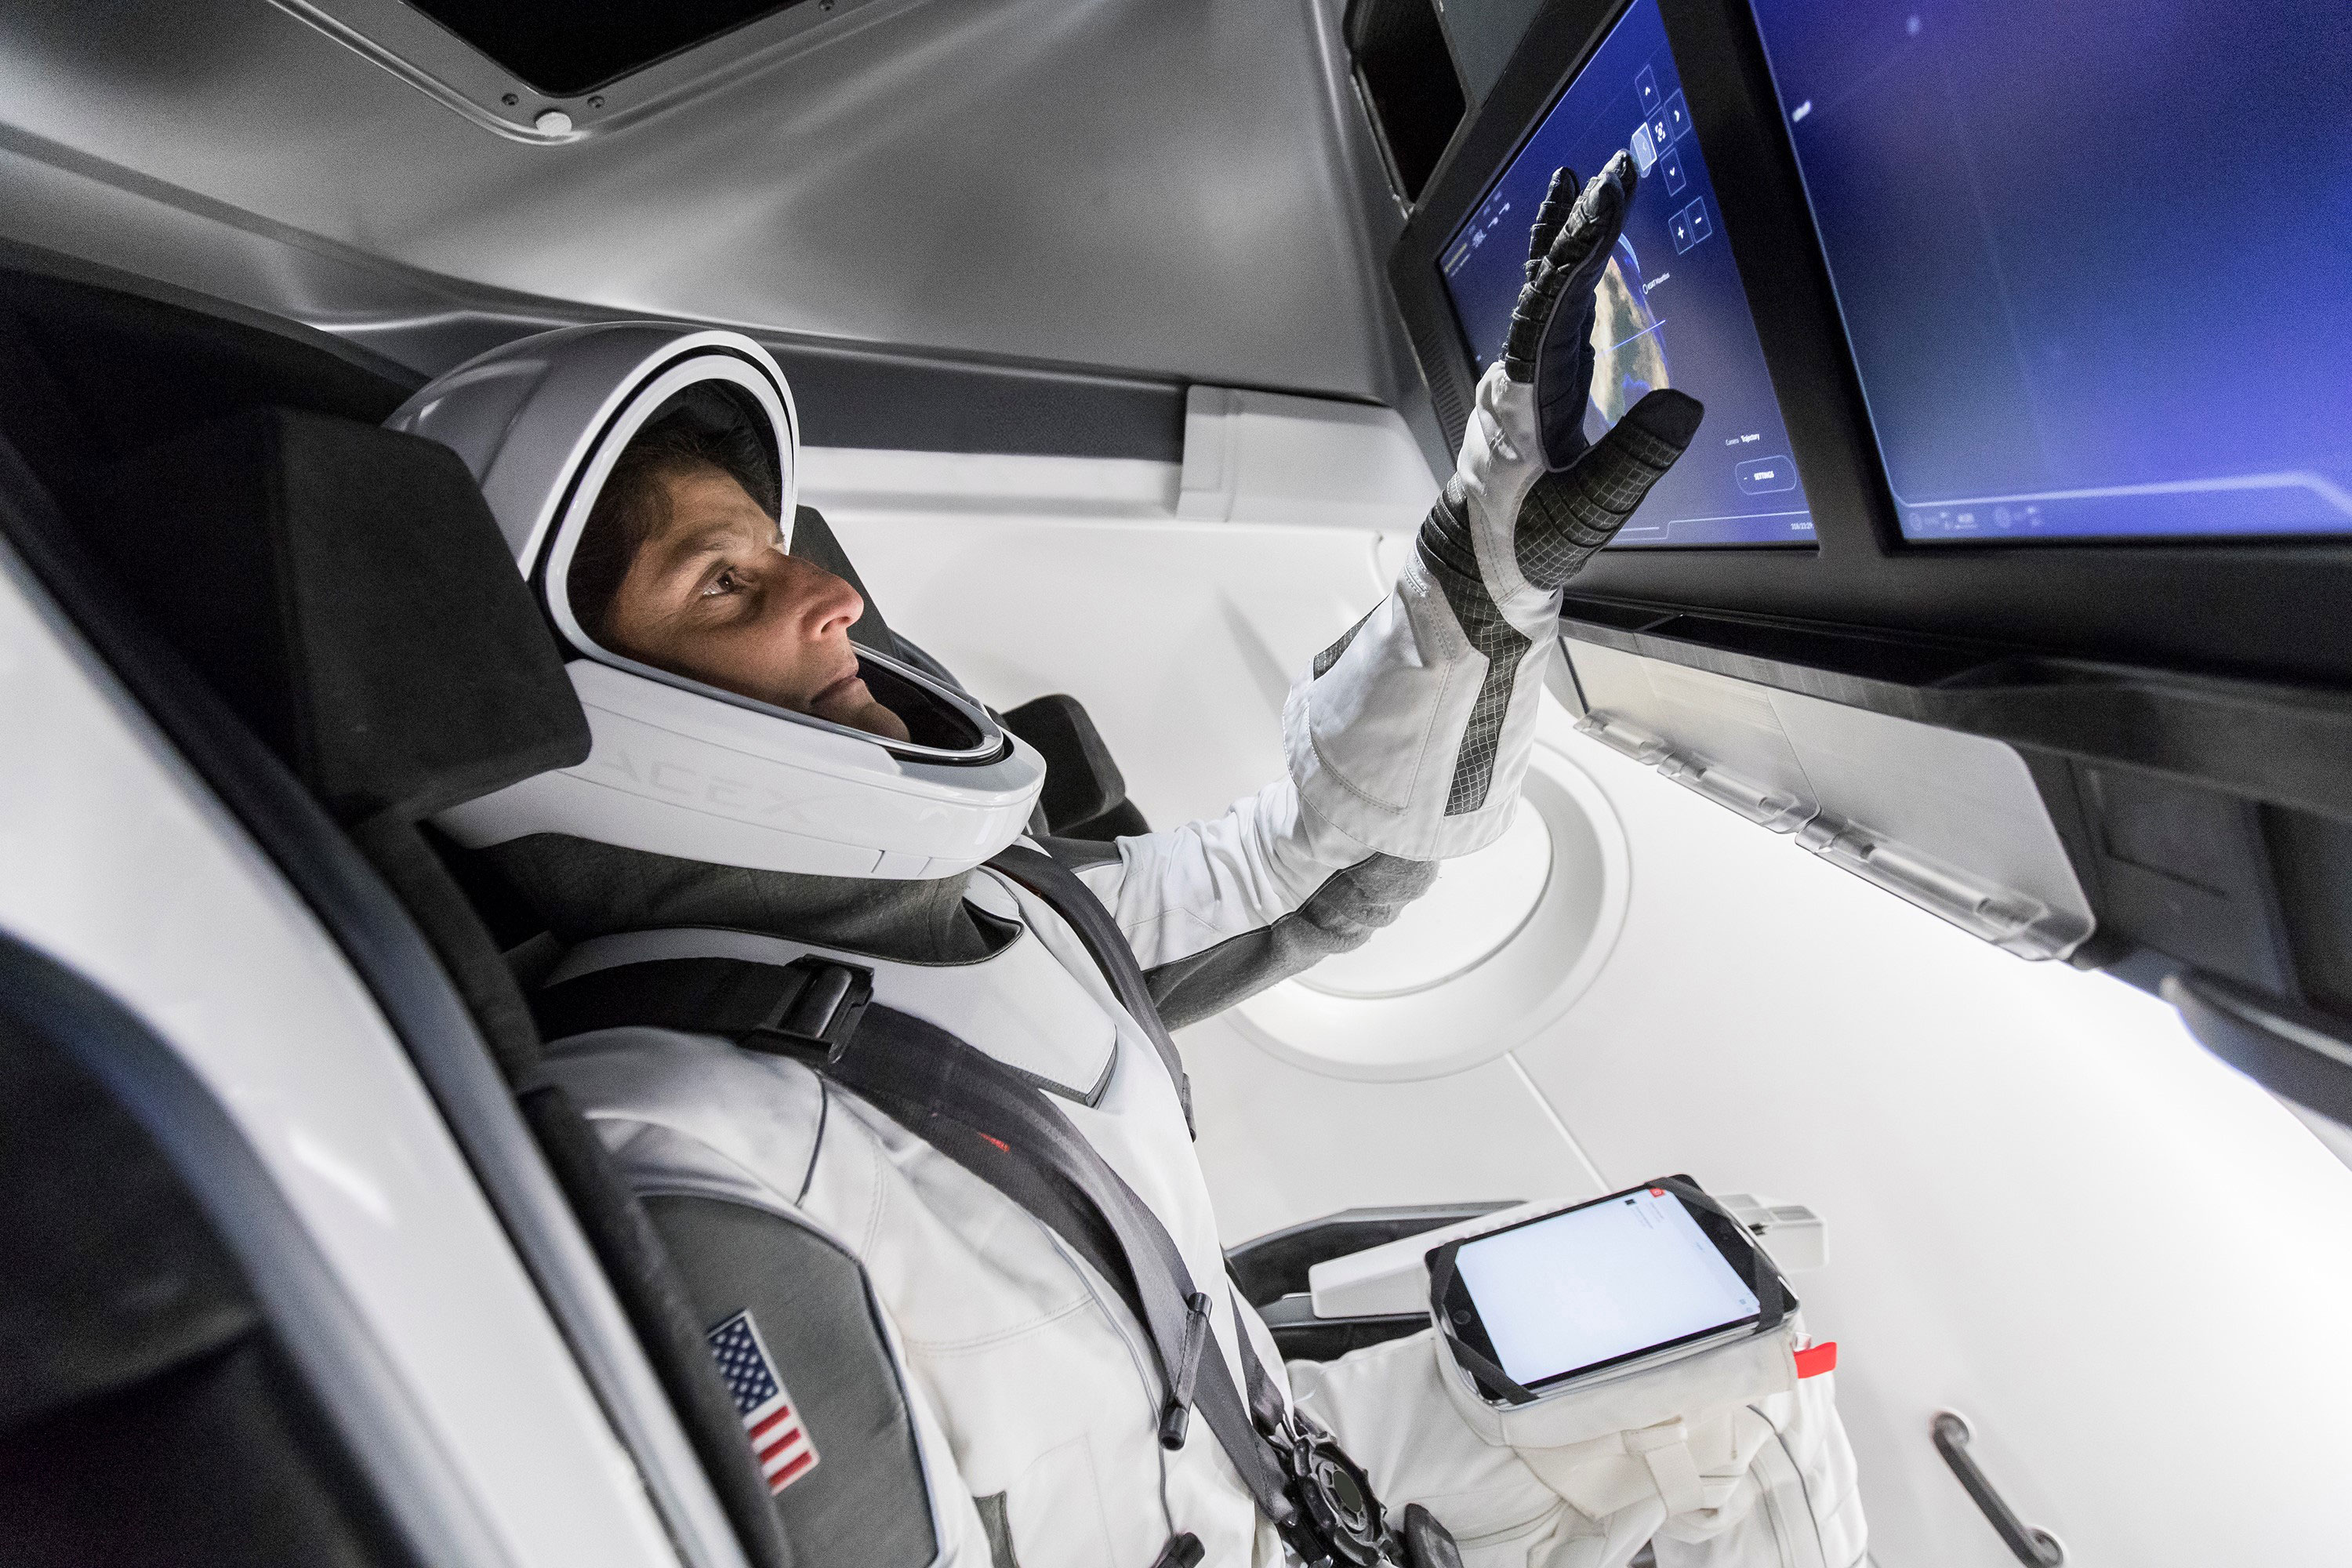 SpaceX's astronaut spacesuit for Crew Dragon ...